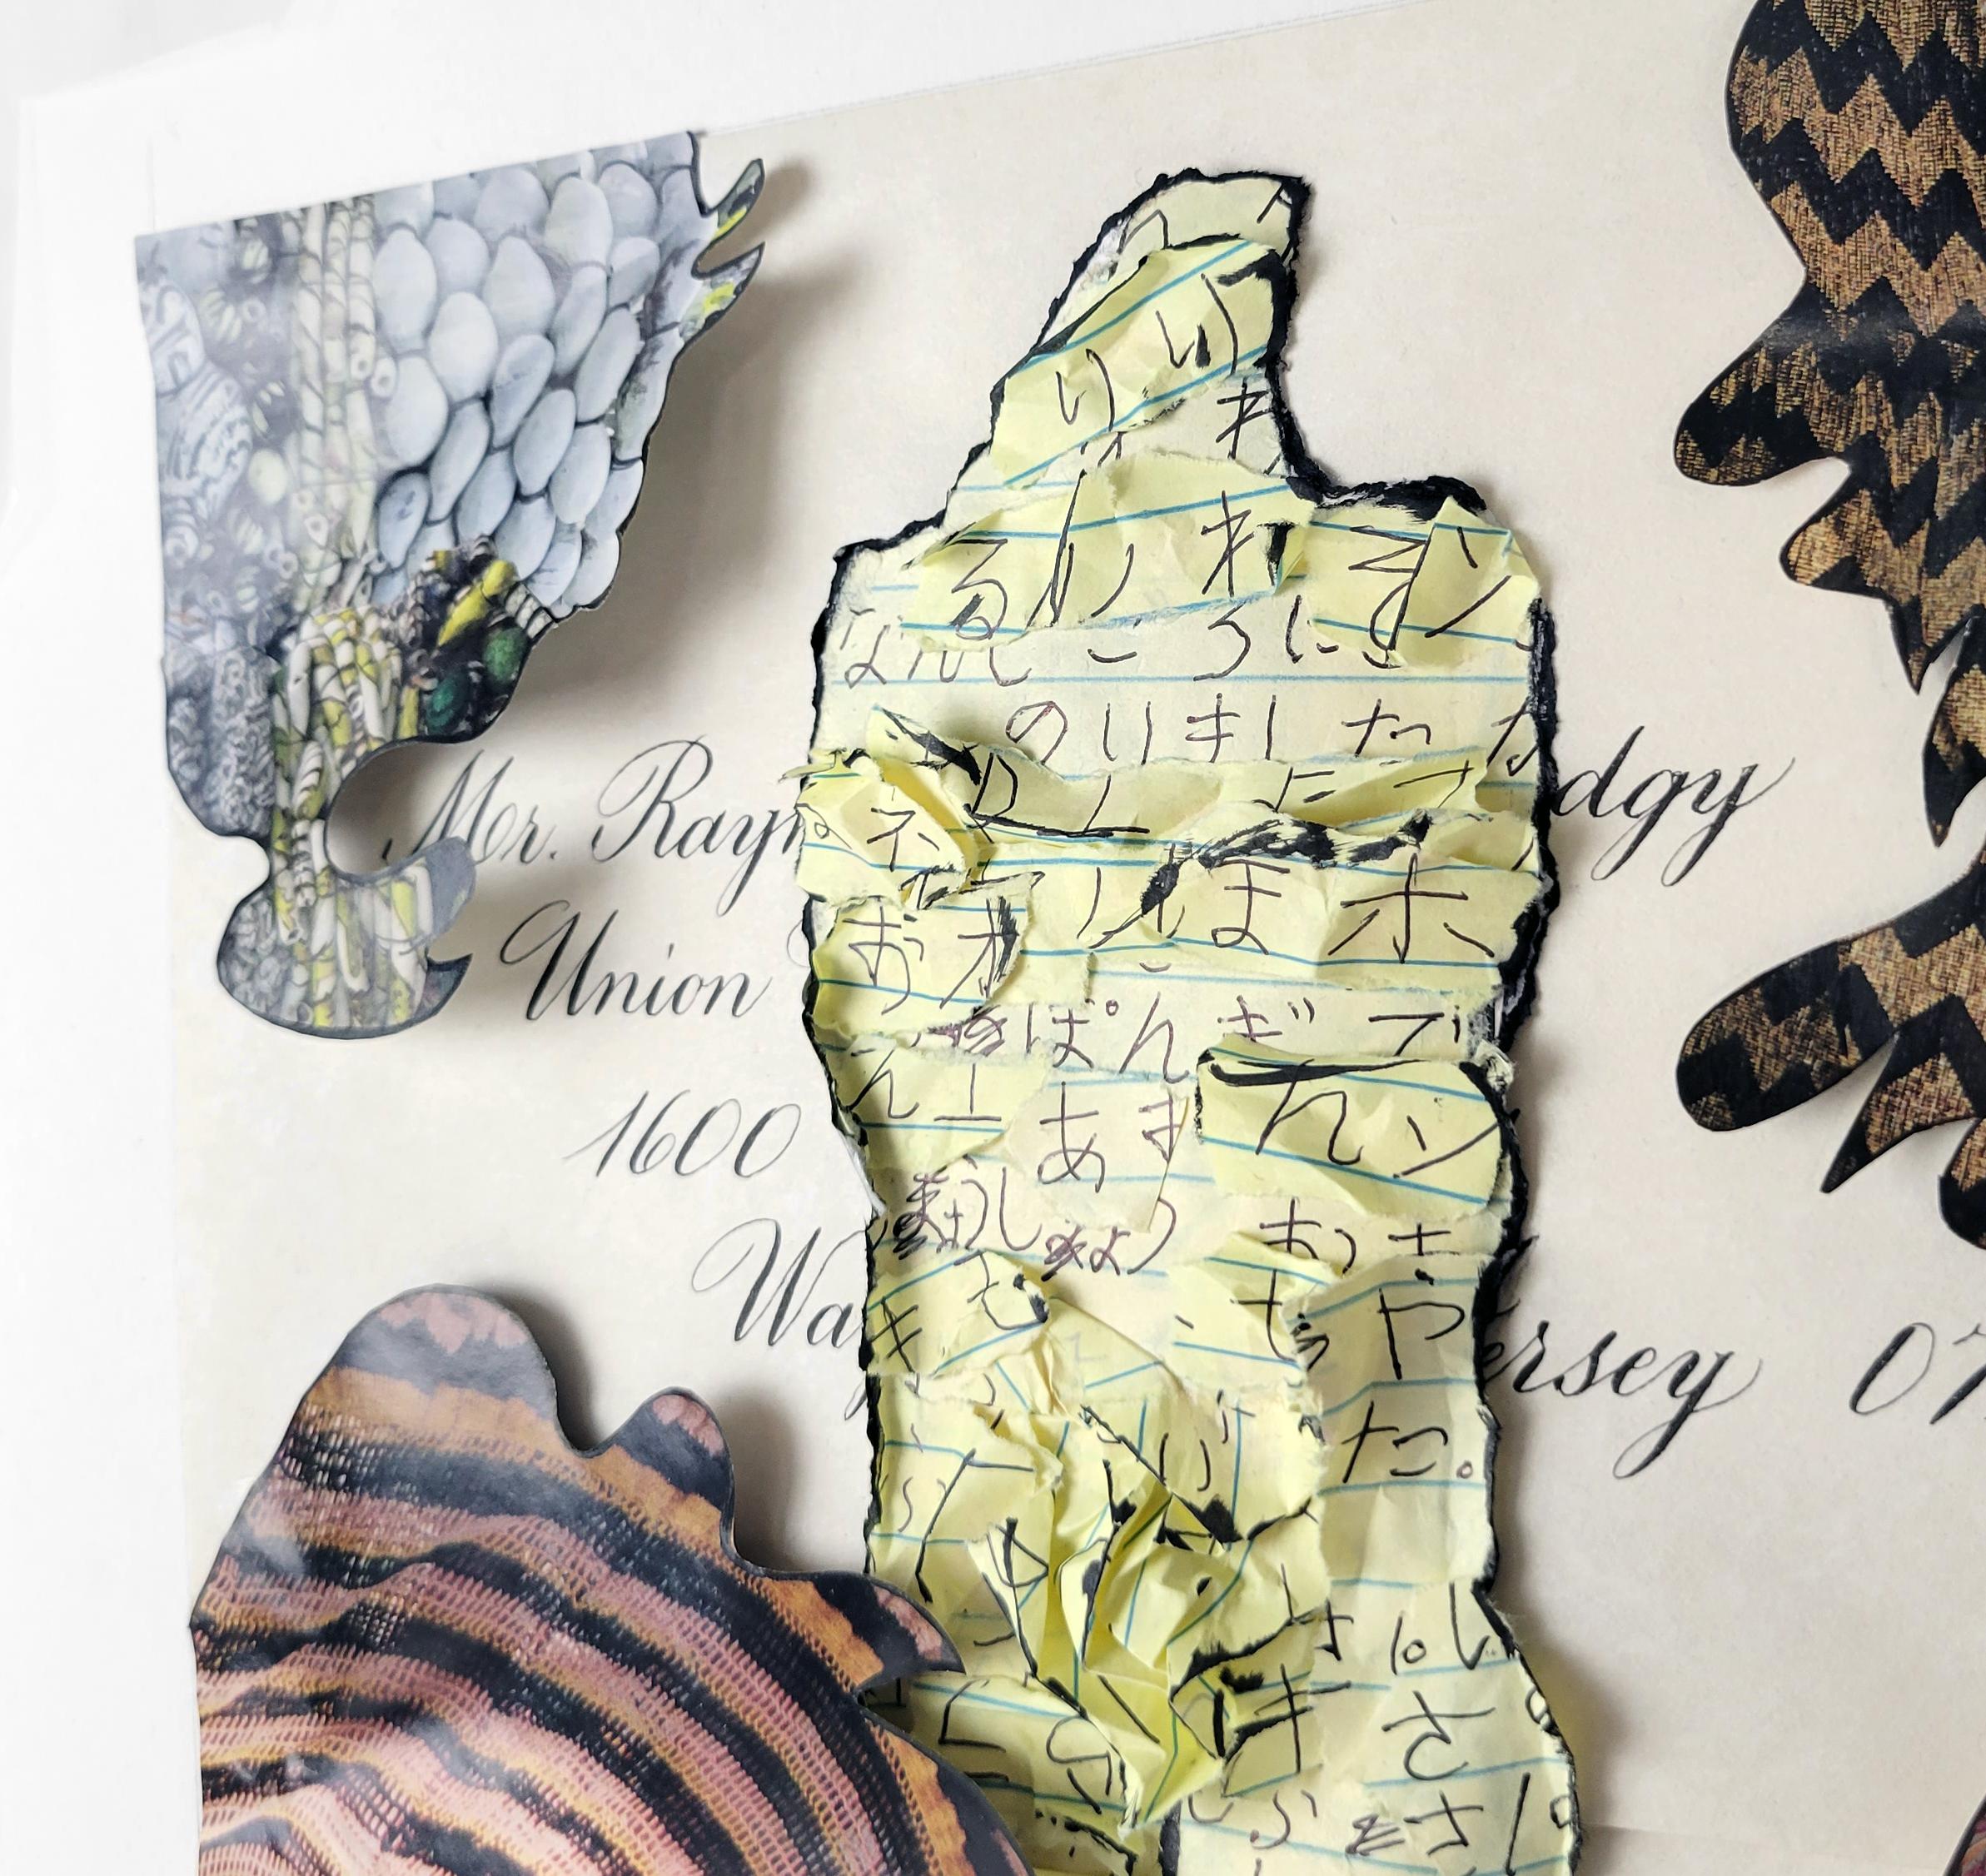 Linda Stein, Studying Japanese 991 - Contemporary 3D Sculptural Drawing Collage For Sale 7